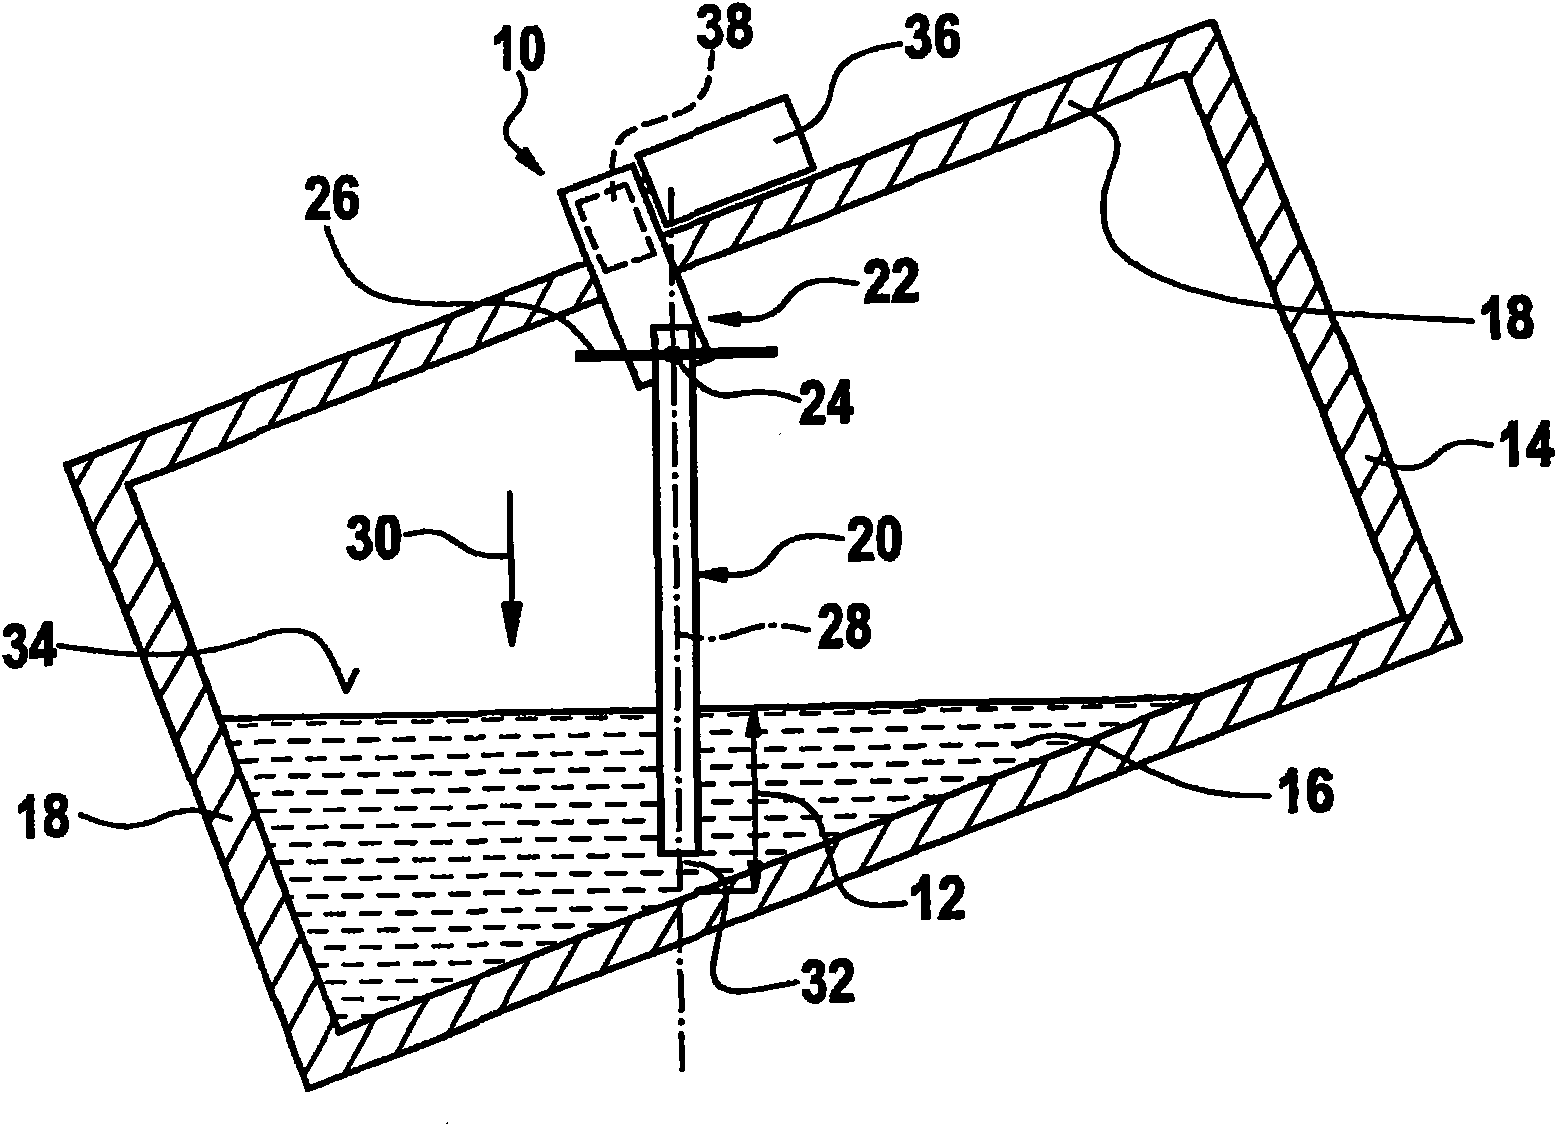 Device for measuring the fill level in a liquid container